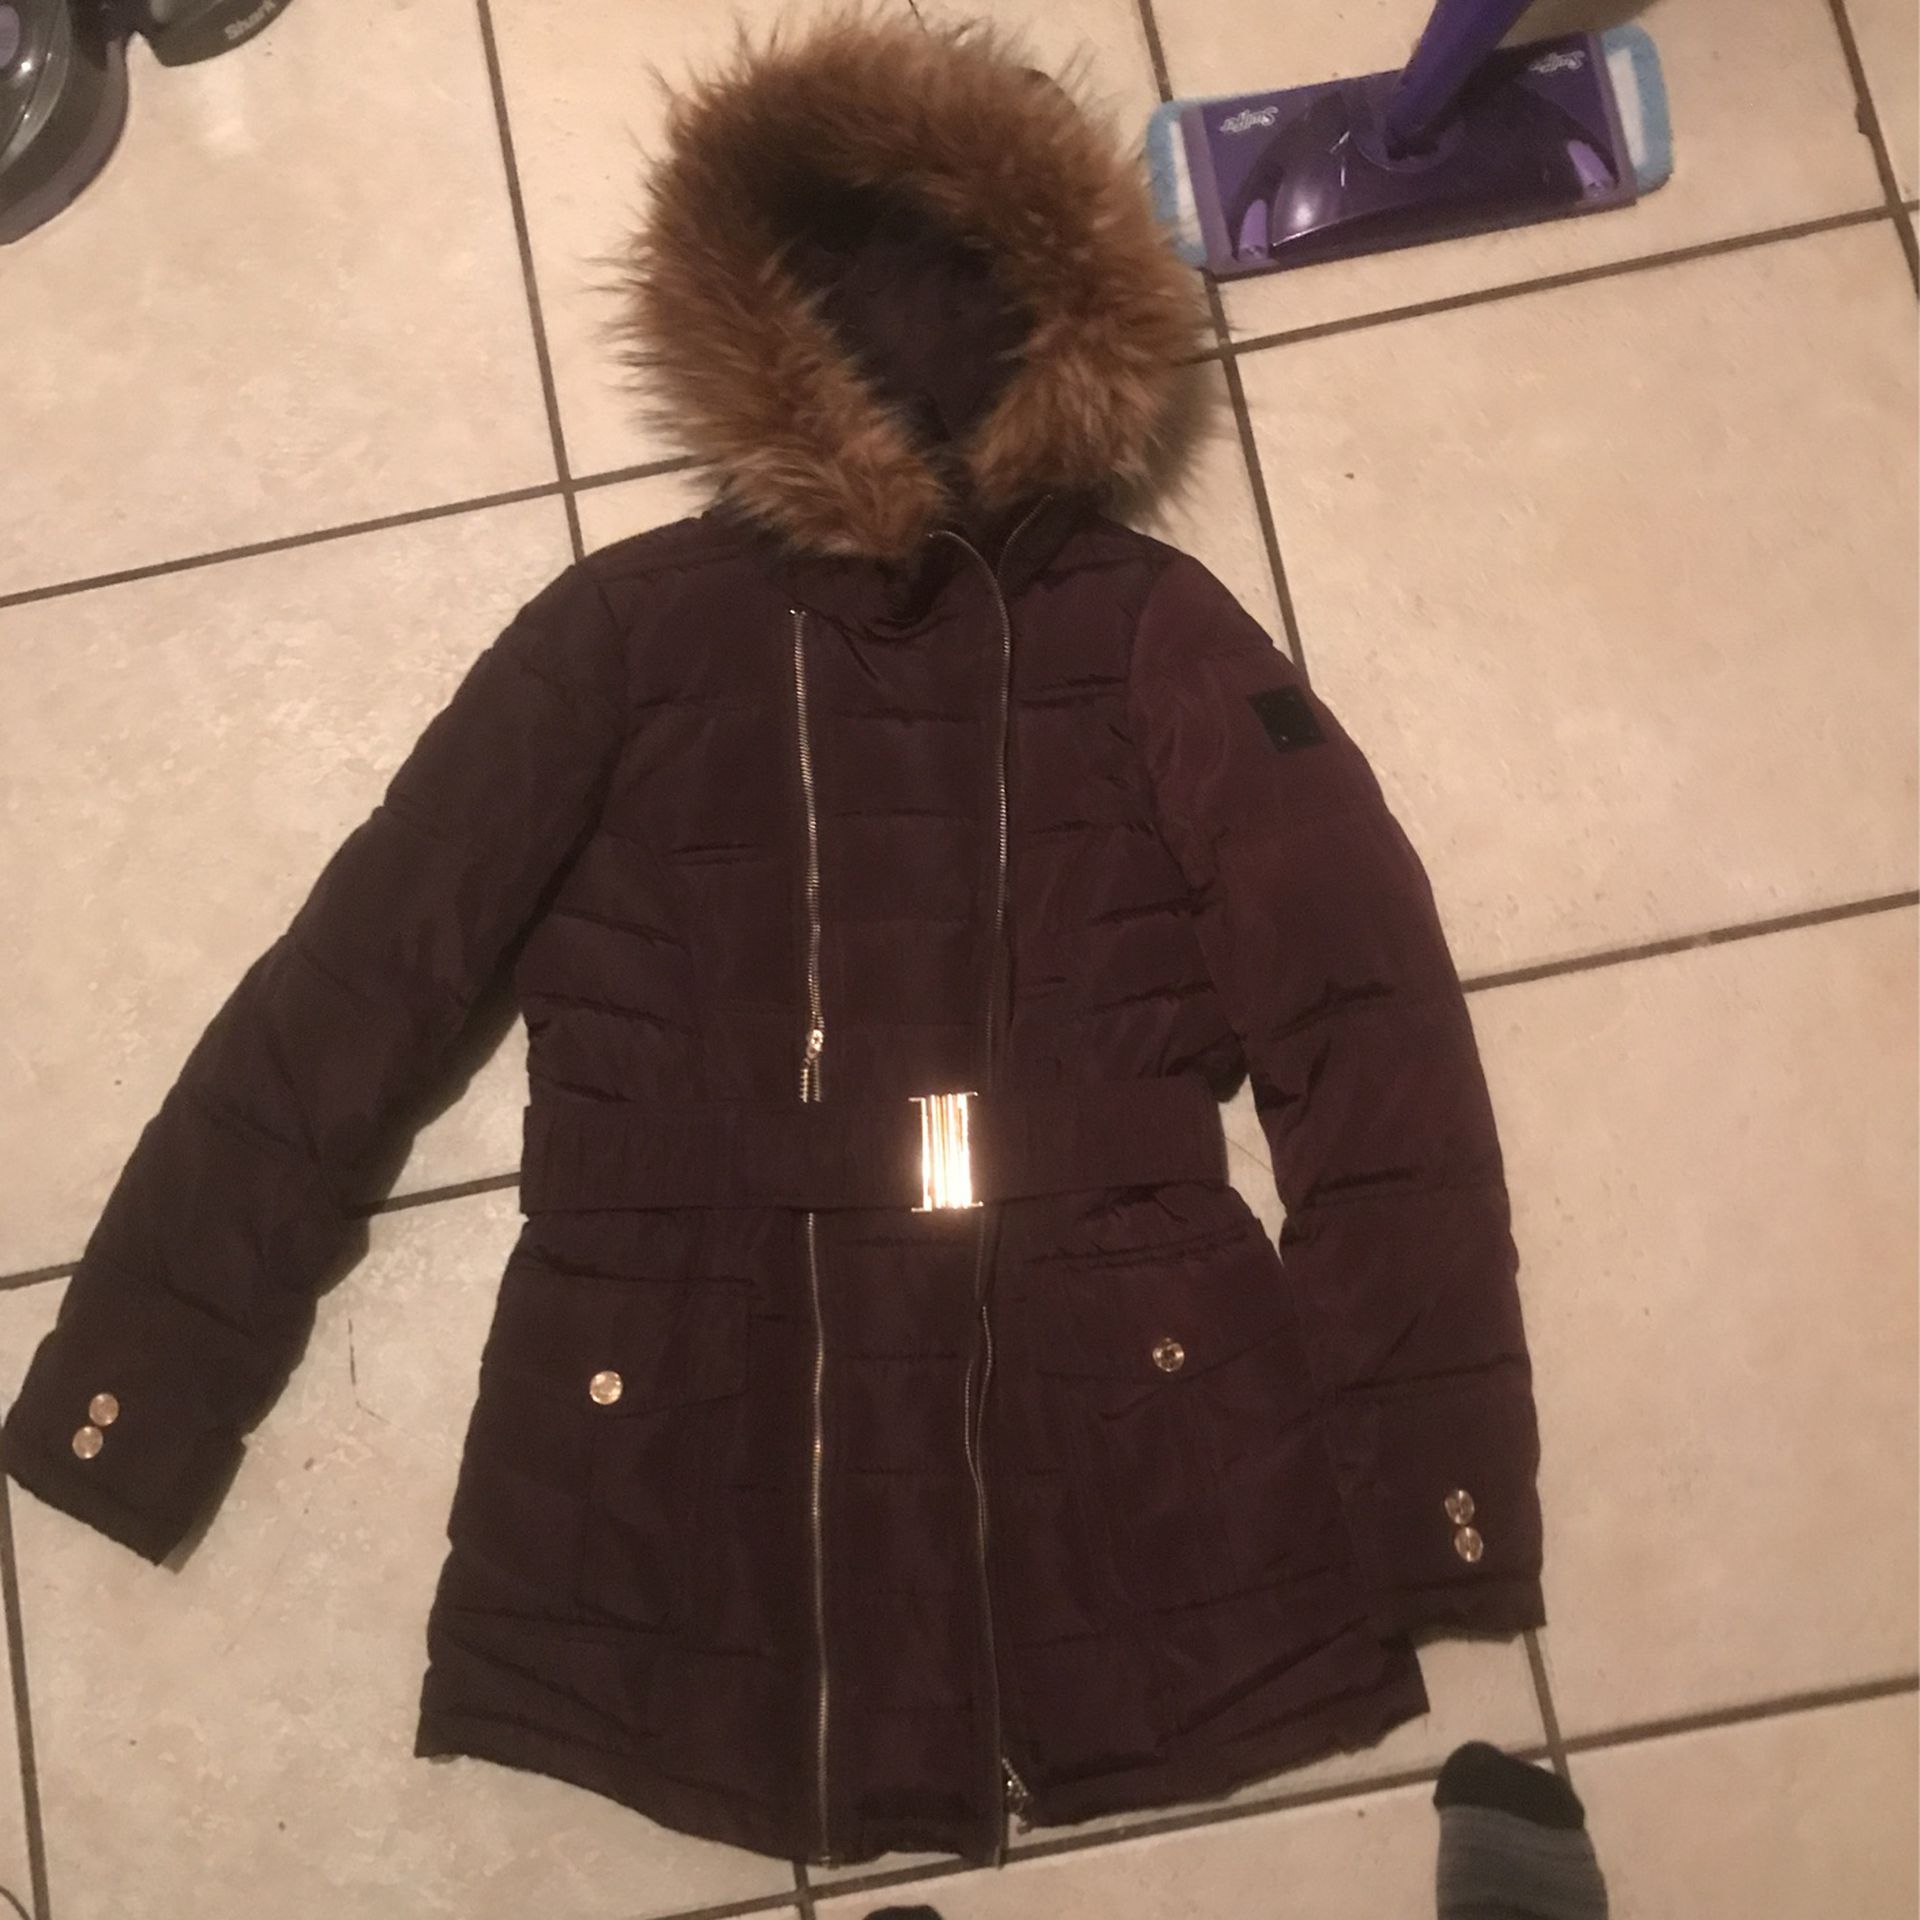 Woman’s Size Small Knee Length Warm Winter Jacket 